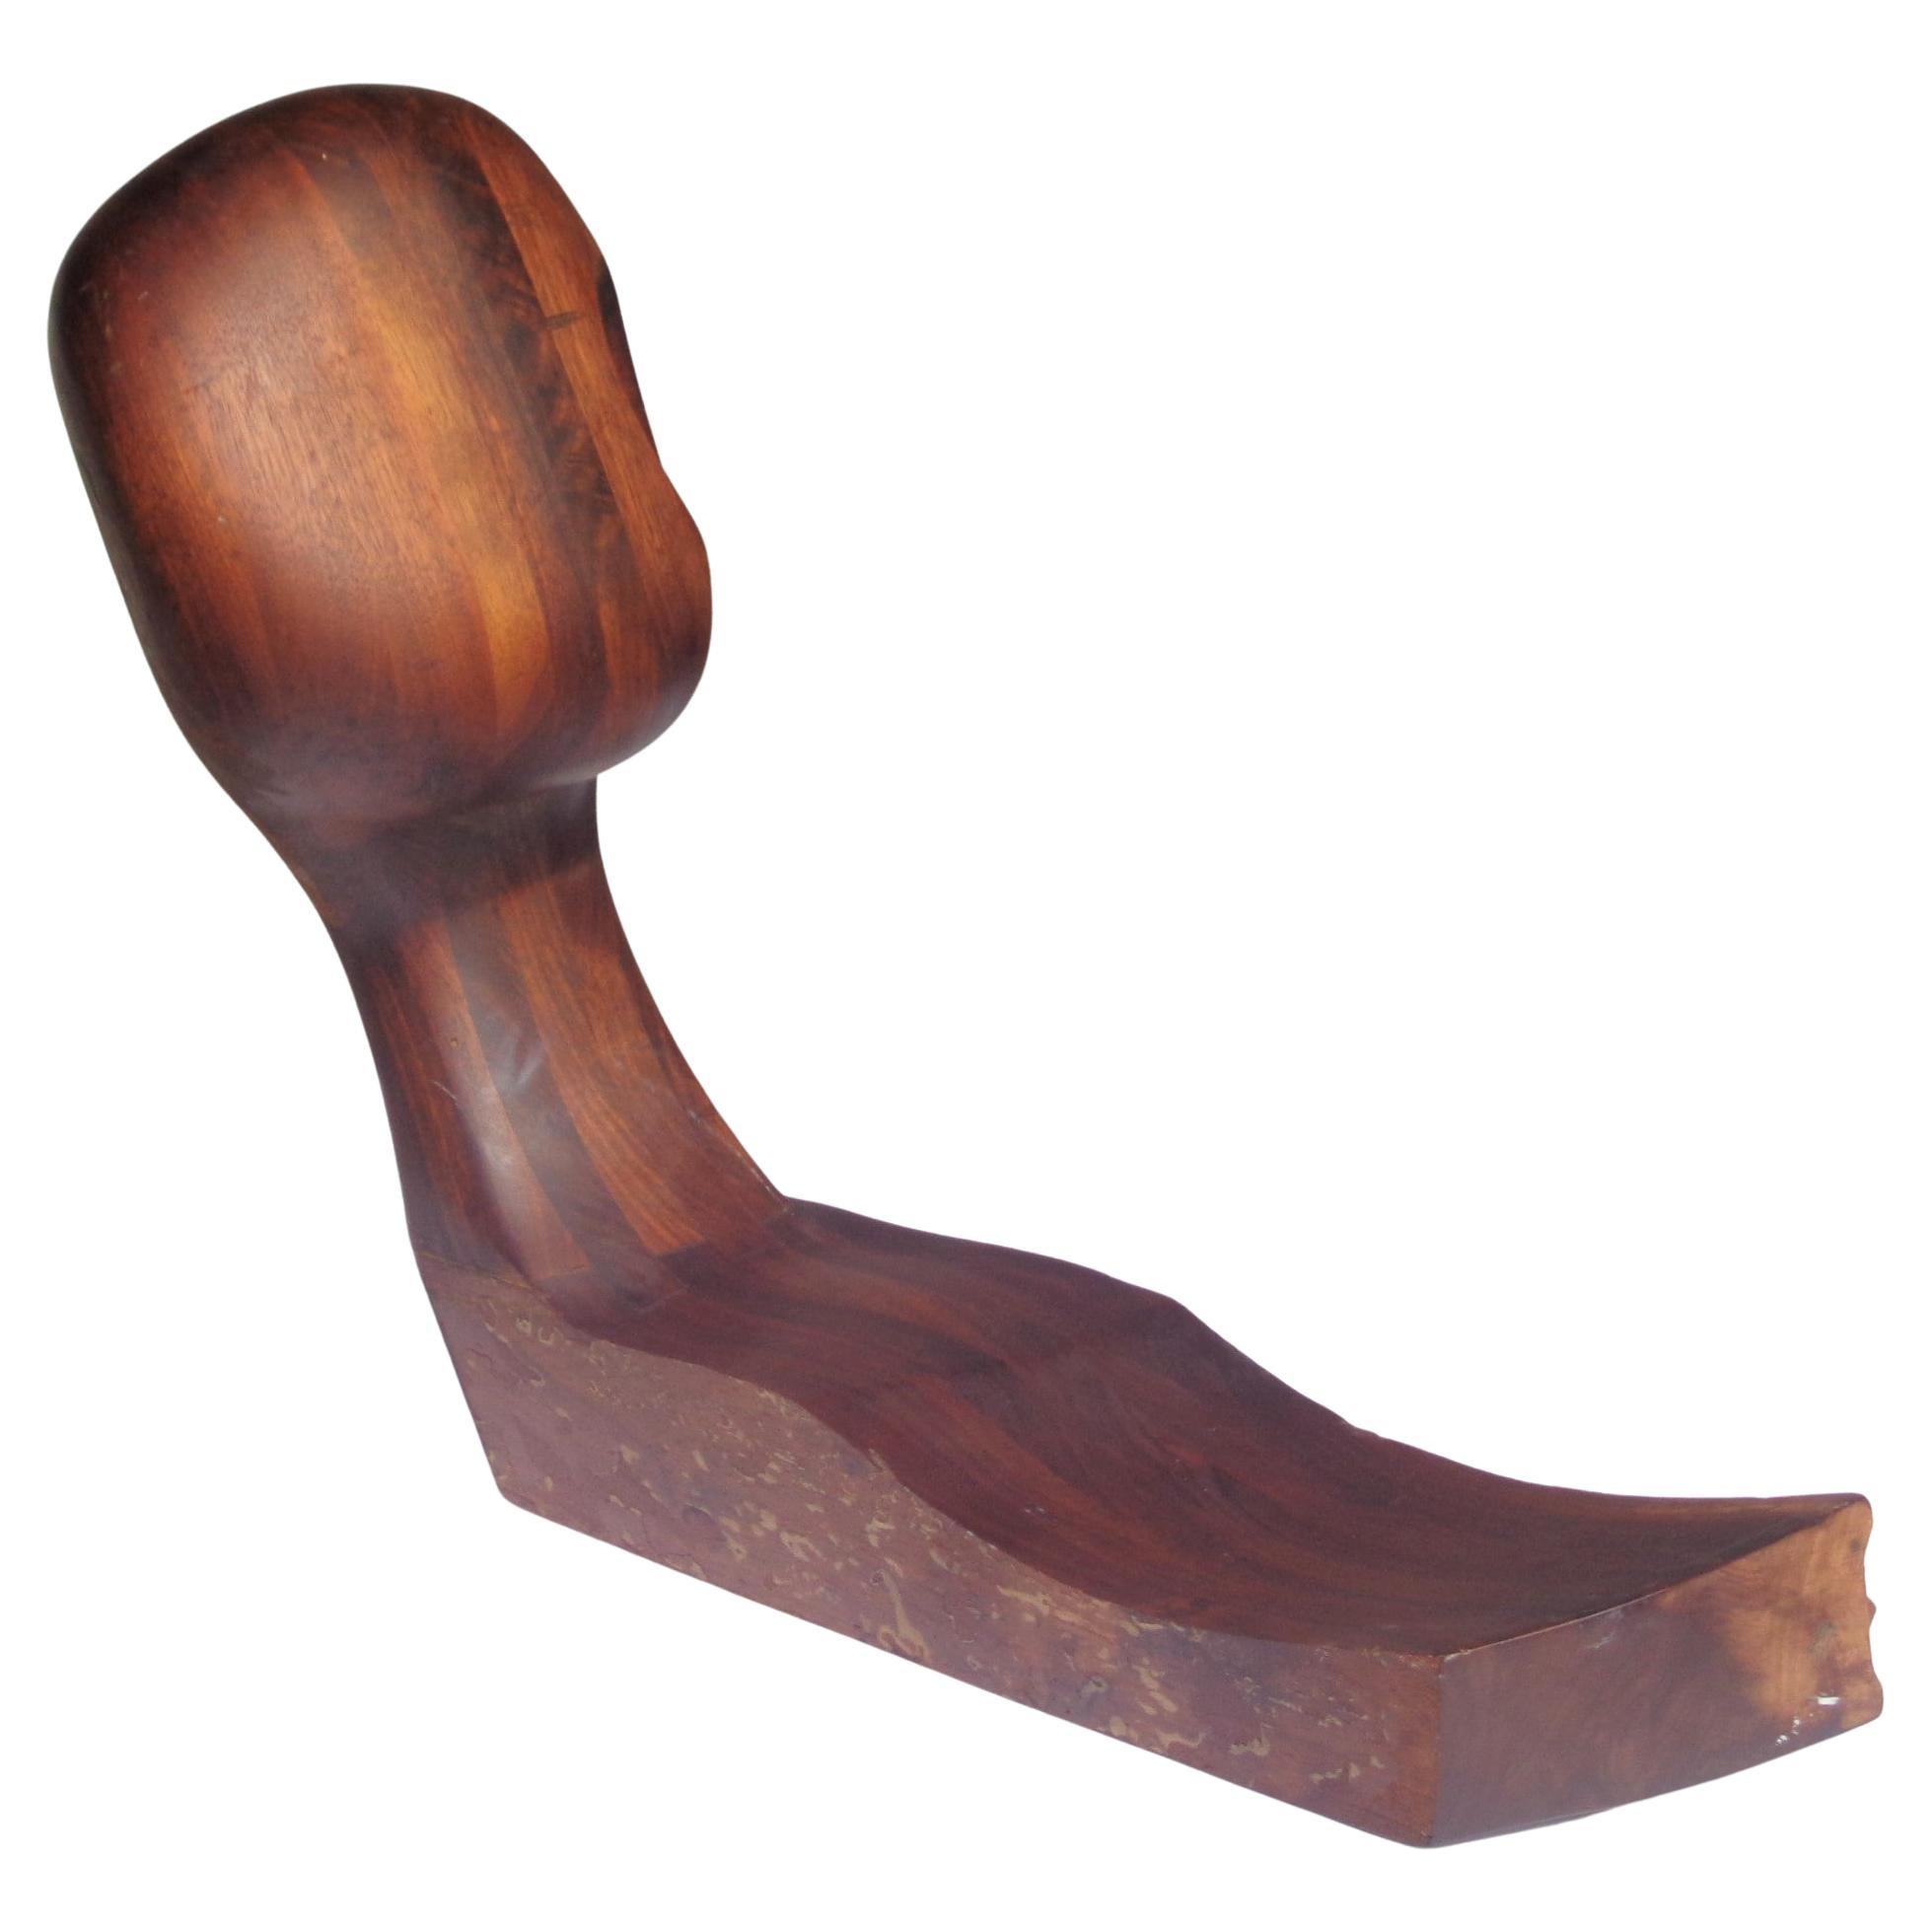 American Studio Craft Movement Abstract Sculpture Wood Bust, 1970-1980 For Sale 2